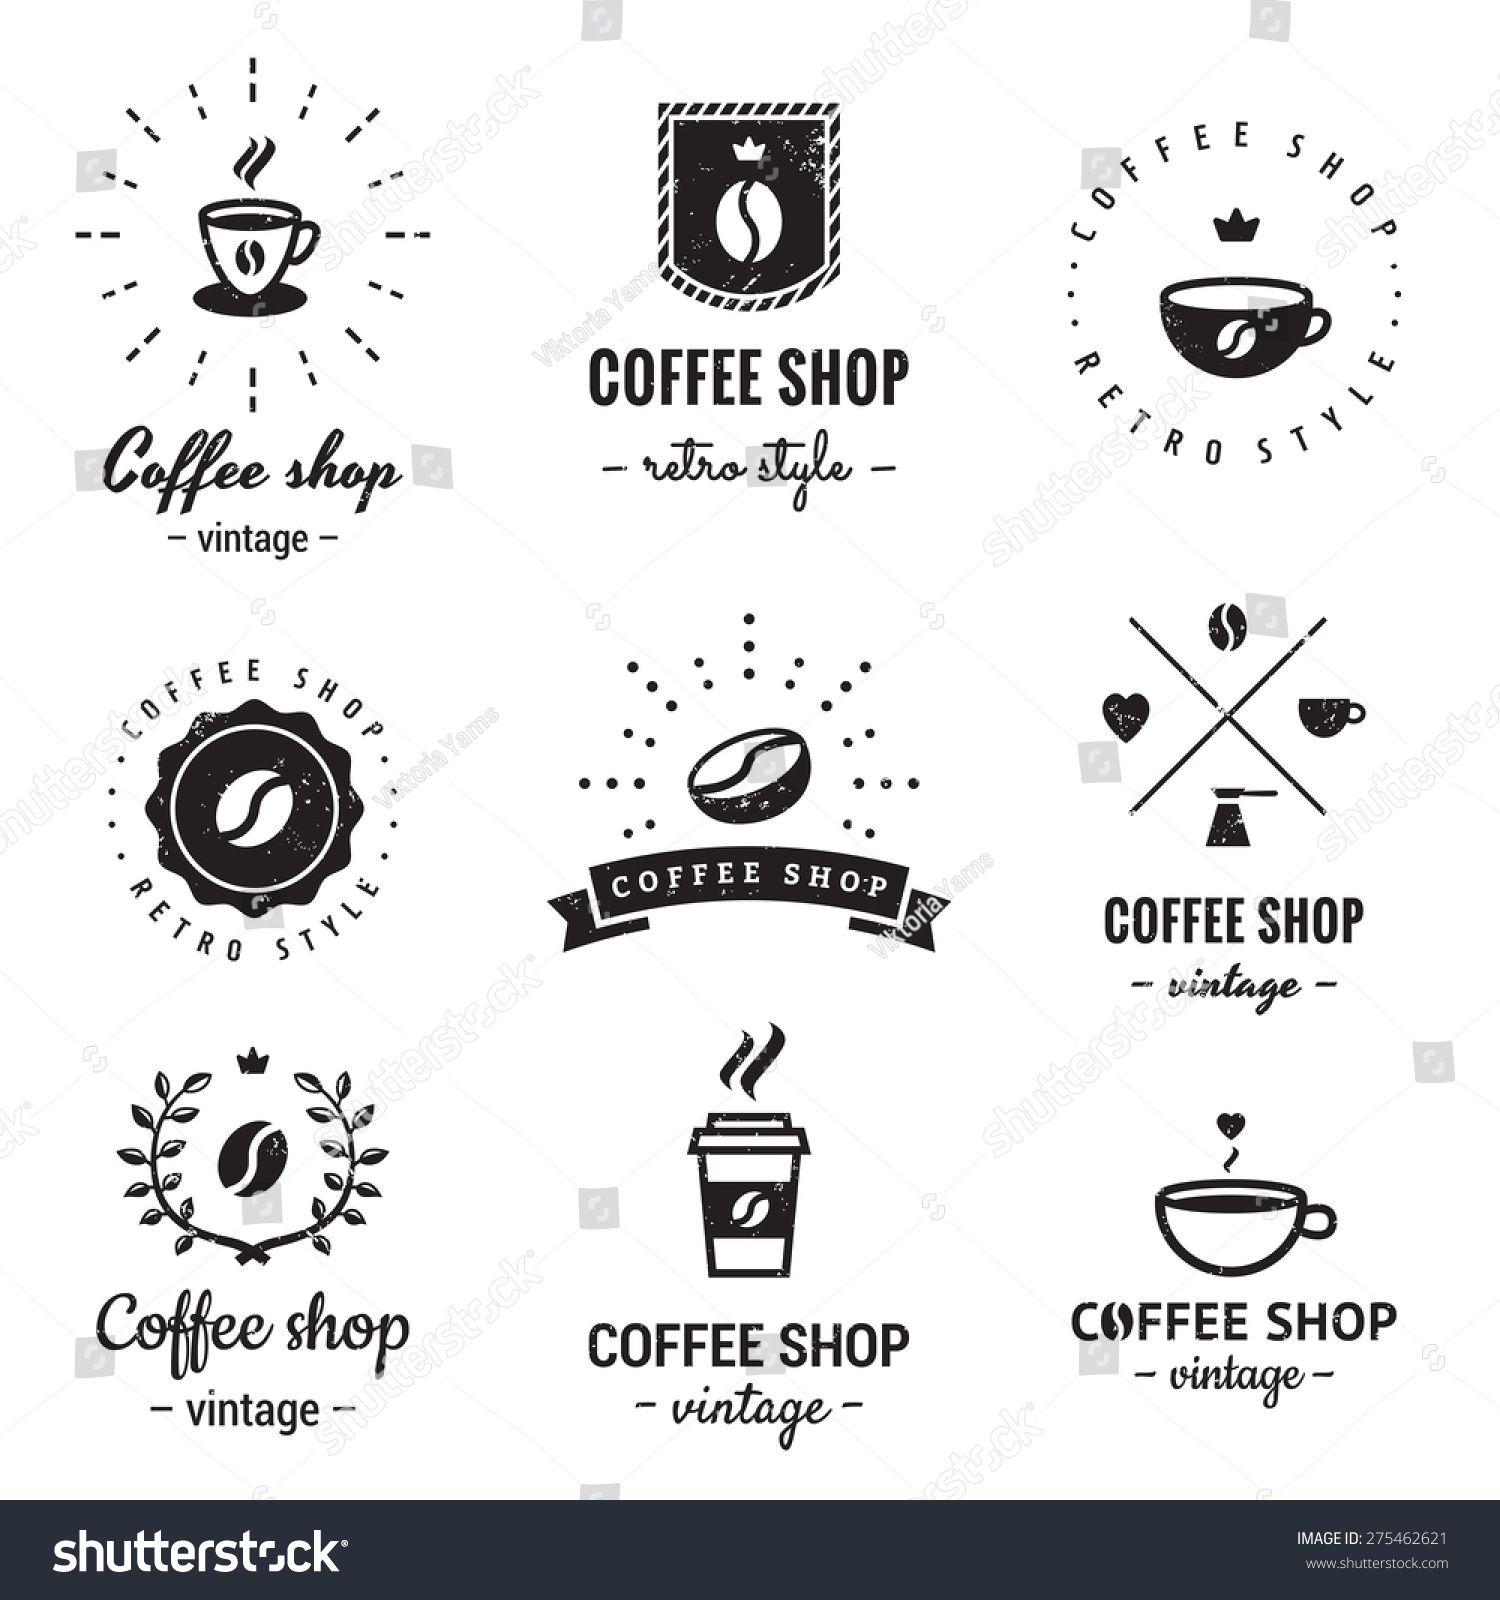 Vintage Coffee Logo - Coffee shop logo vintage vector set. Hipster and retro style